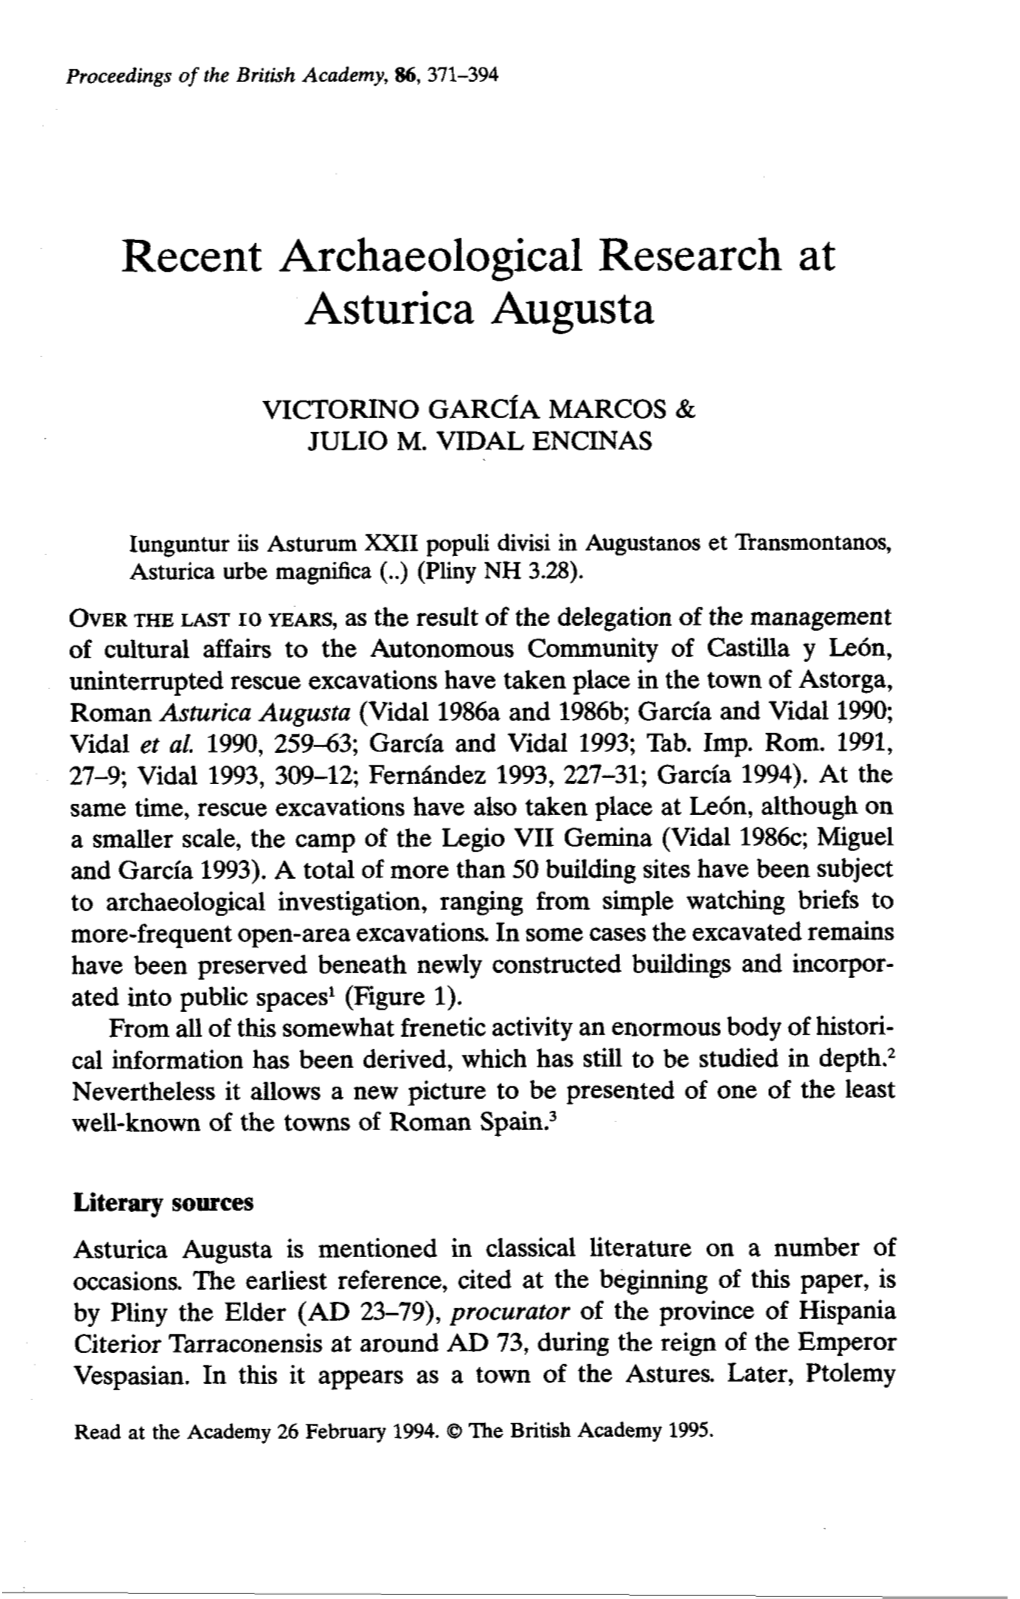 Recent Archaeological Research at Asturica Augusta